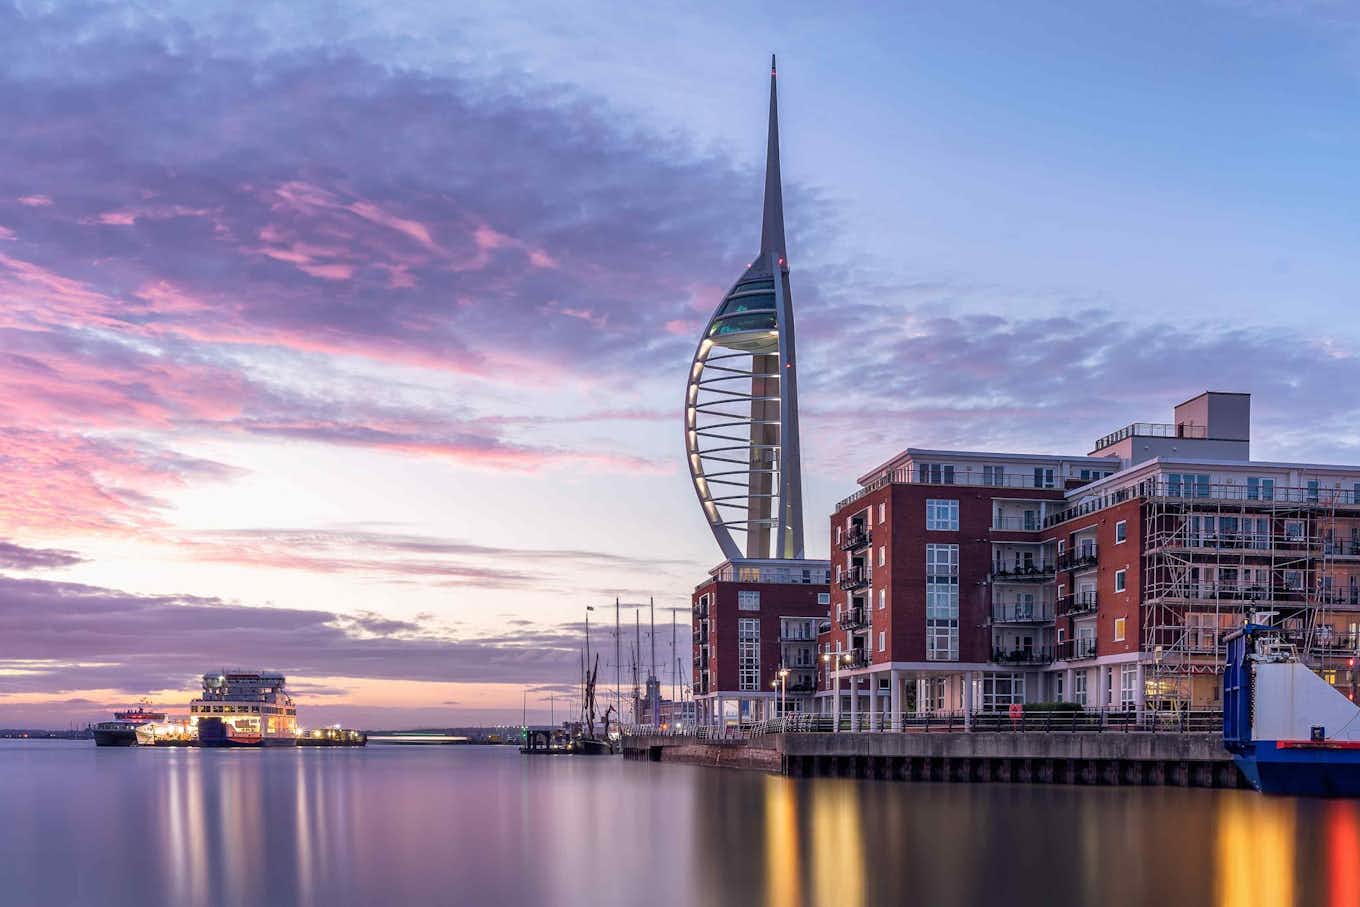 A view of Portsmouth and the sea